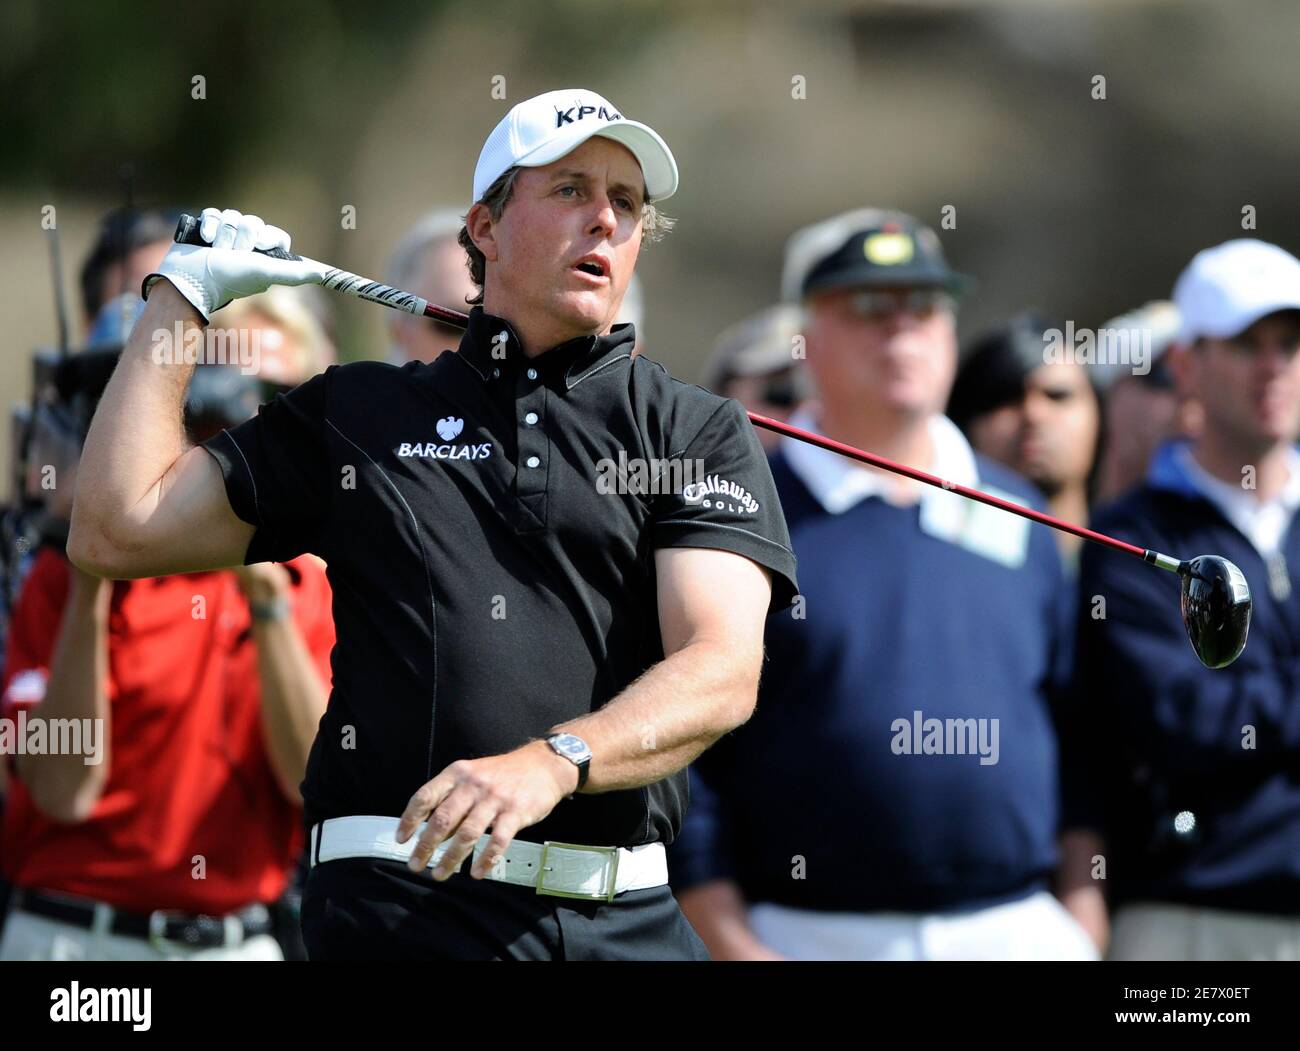 Phil Mickelson of the U.S. reacts to a slice on the second hole, sending his ball into the rough, during the second round of the Northern Trust Open golf tournament in the Pacific Palisades area of Los Angeles February 20, 2009. REUTERS/Gus Ruelas (UNITED STATES) Stock Photo